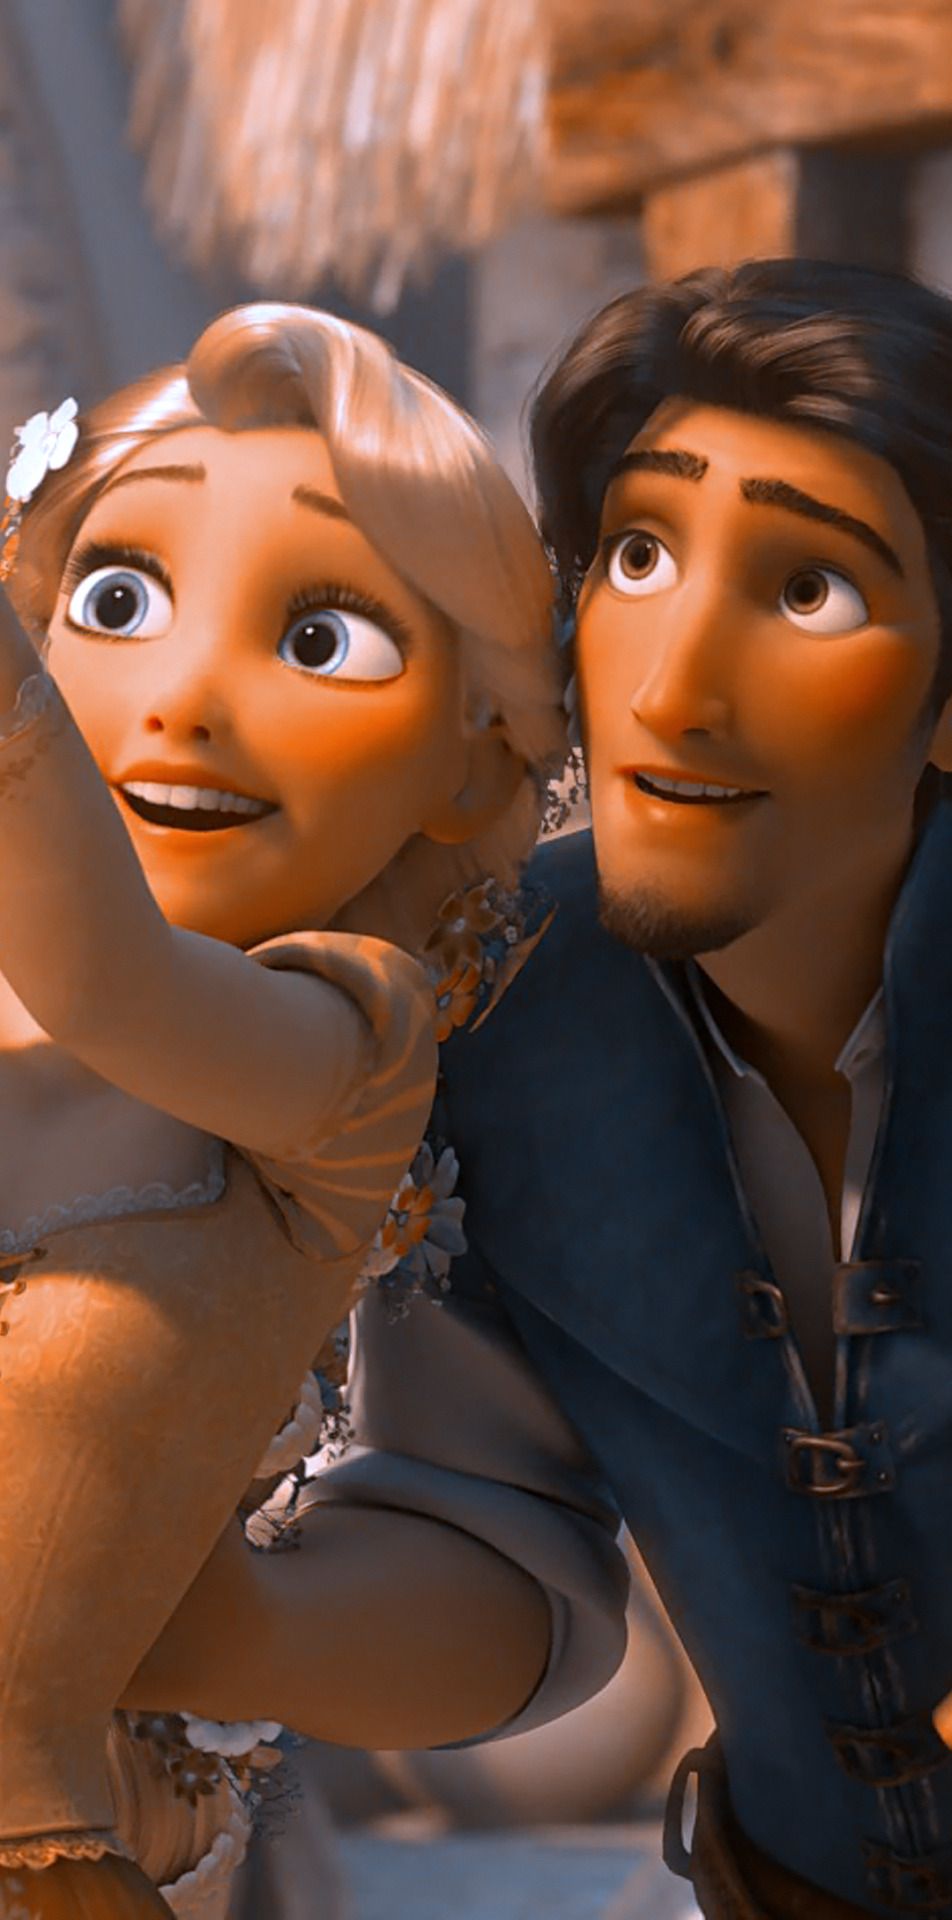 Flynn and Rapunzel wallpaper 828x1792 for iPhone 8, iPhone 8 Plus, iPhone X, XS, XS Max, XR, iPad, Android and other devices - Rapunzel